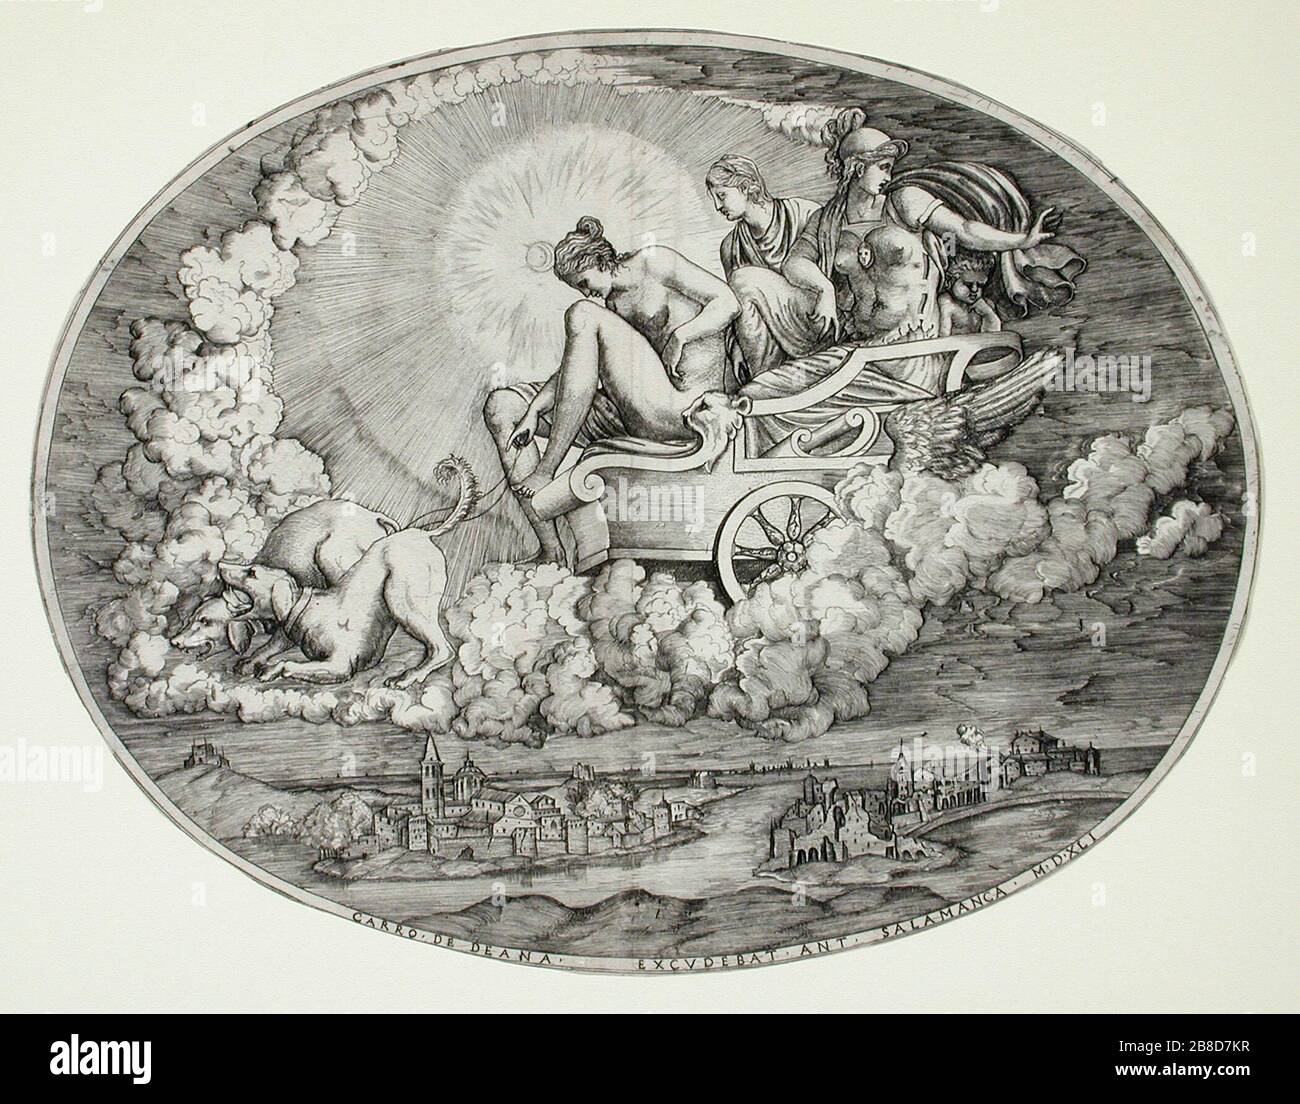 'Diana and Her Chariot; English:  Italy, printed 1541 Prints; engravings Engraving Sheet: 11 7/8 x 15 1/2 in. (30.16 x 39.37 cm) oval Mary Stansbury Ruiz Bequest (M.88.91.198) Prints and Drawings; Printed 1541; ' Stock Photo